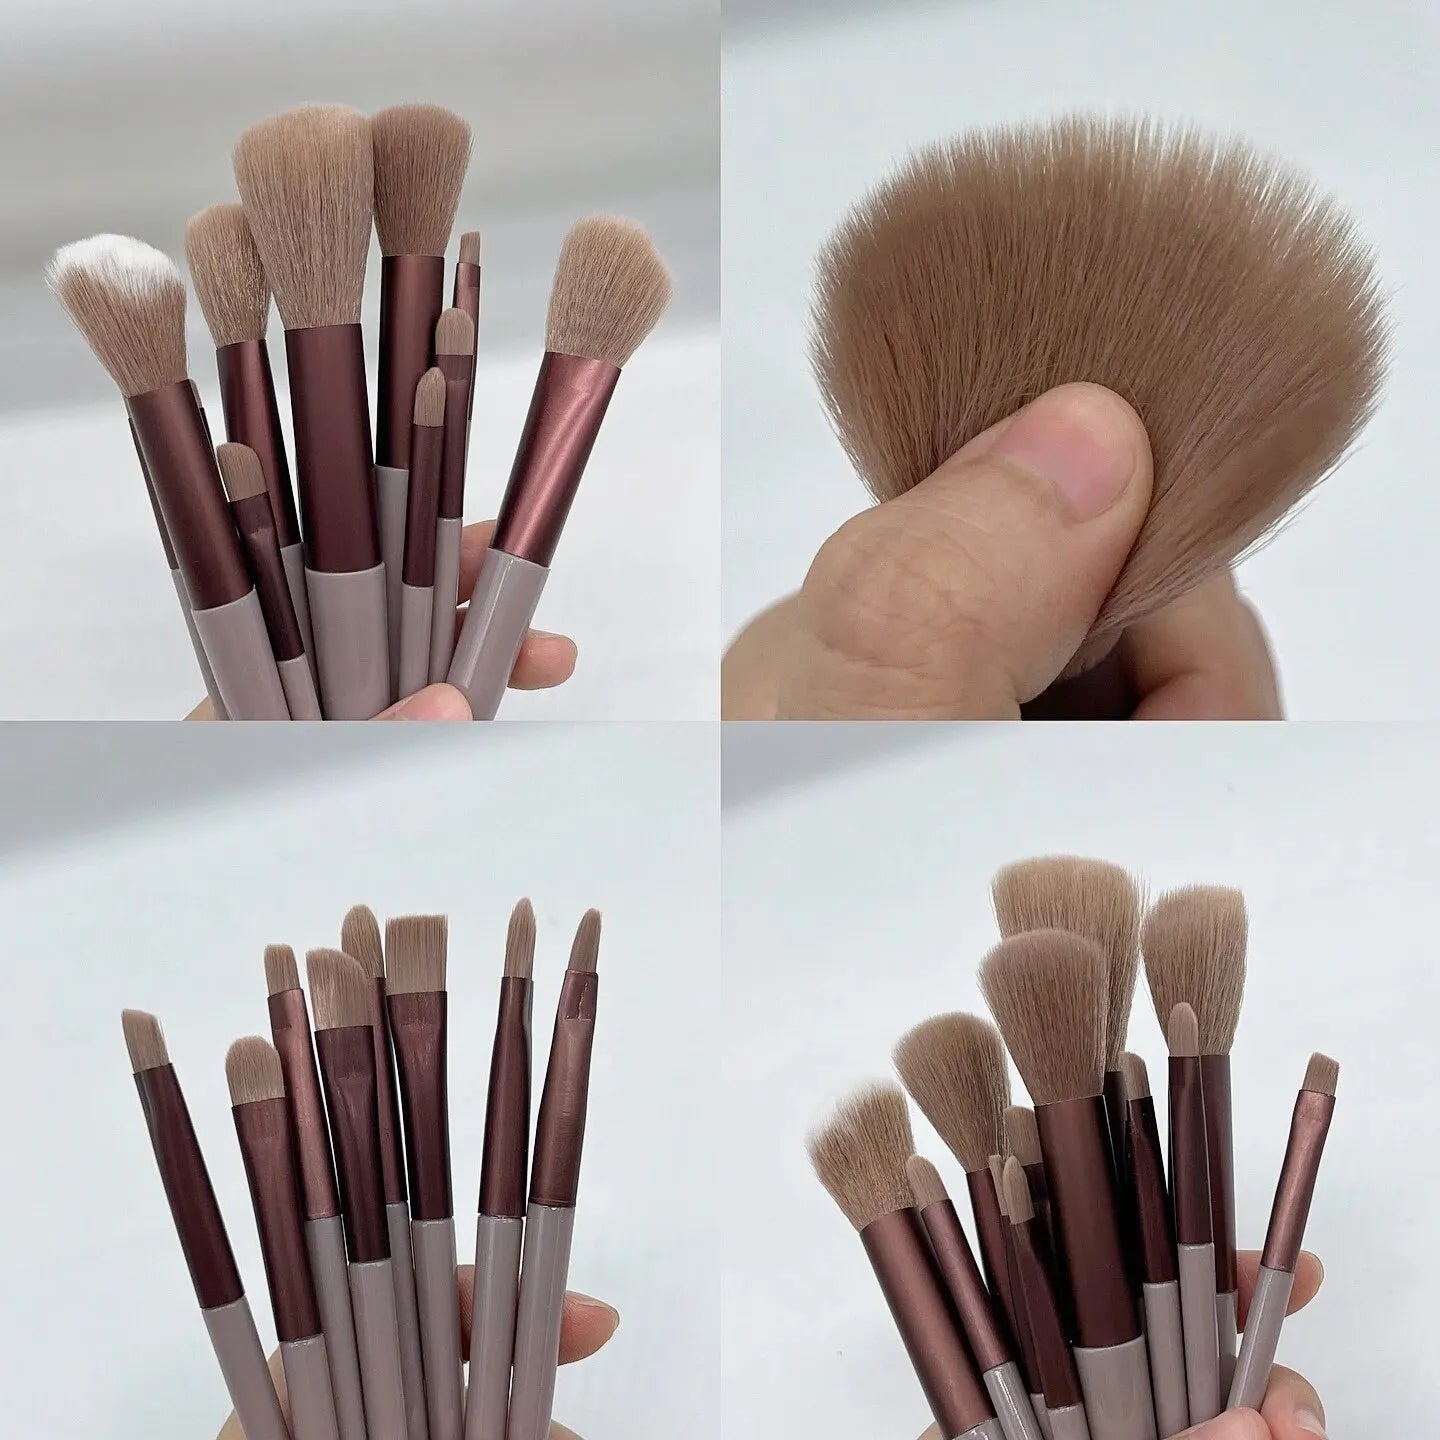 13-Piece Makeup Brush Set: Essential Beauty Tools with Bag